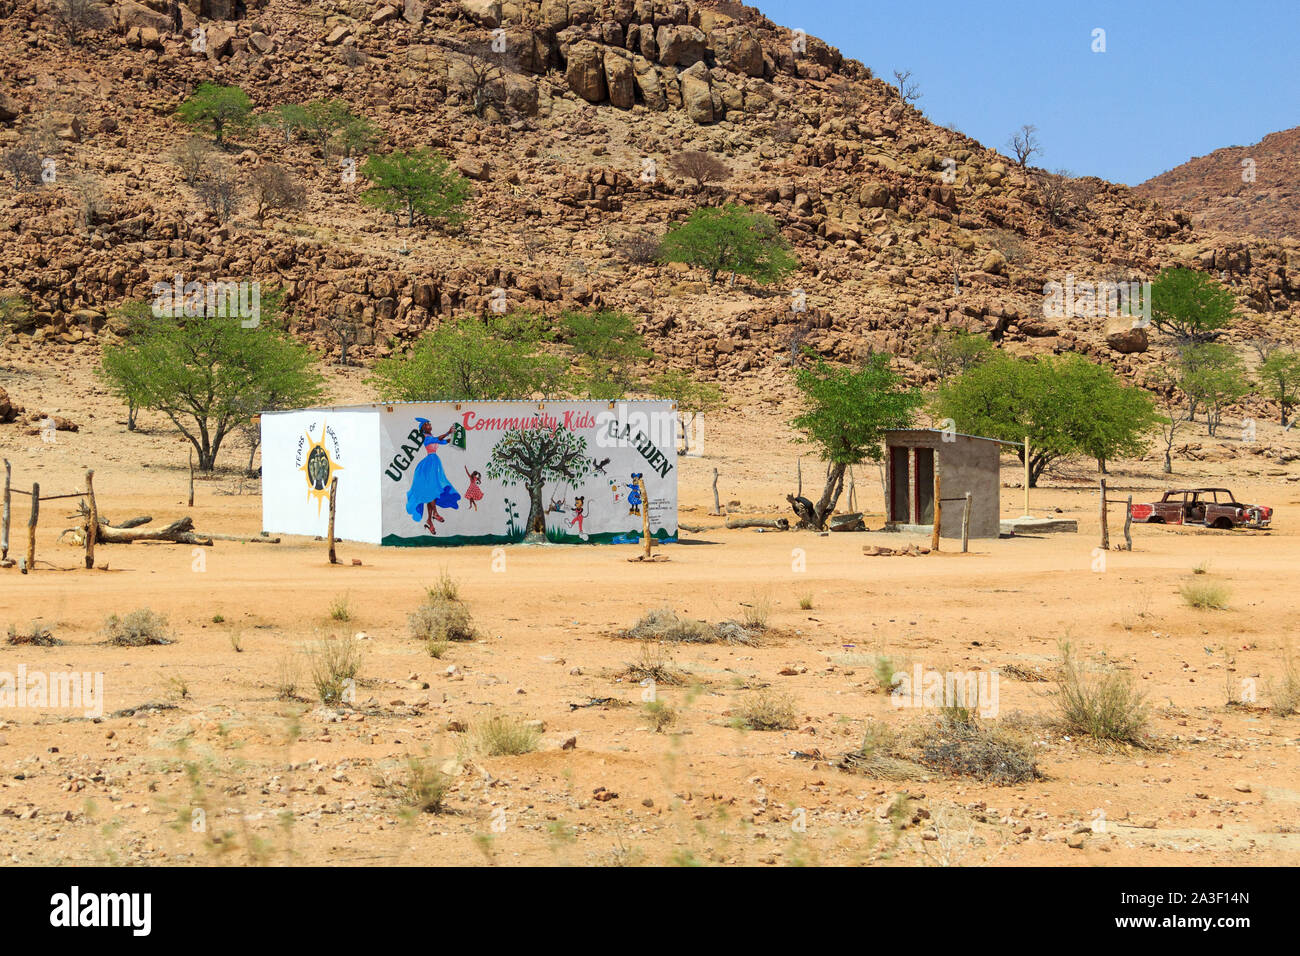 Abandoned kindergarten with a painting on the wall, Damaraland, Namibia, Africa Stock Photo